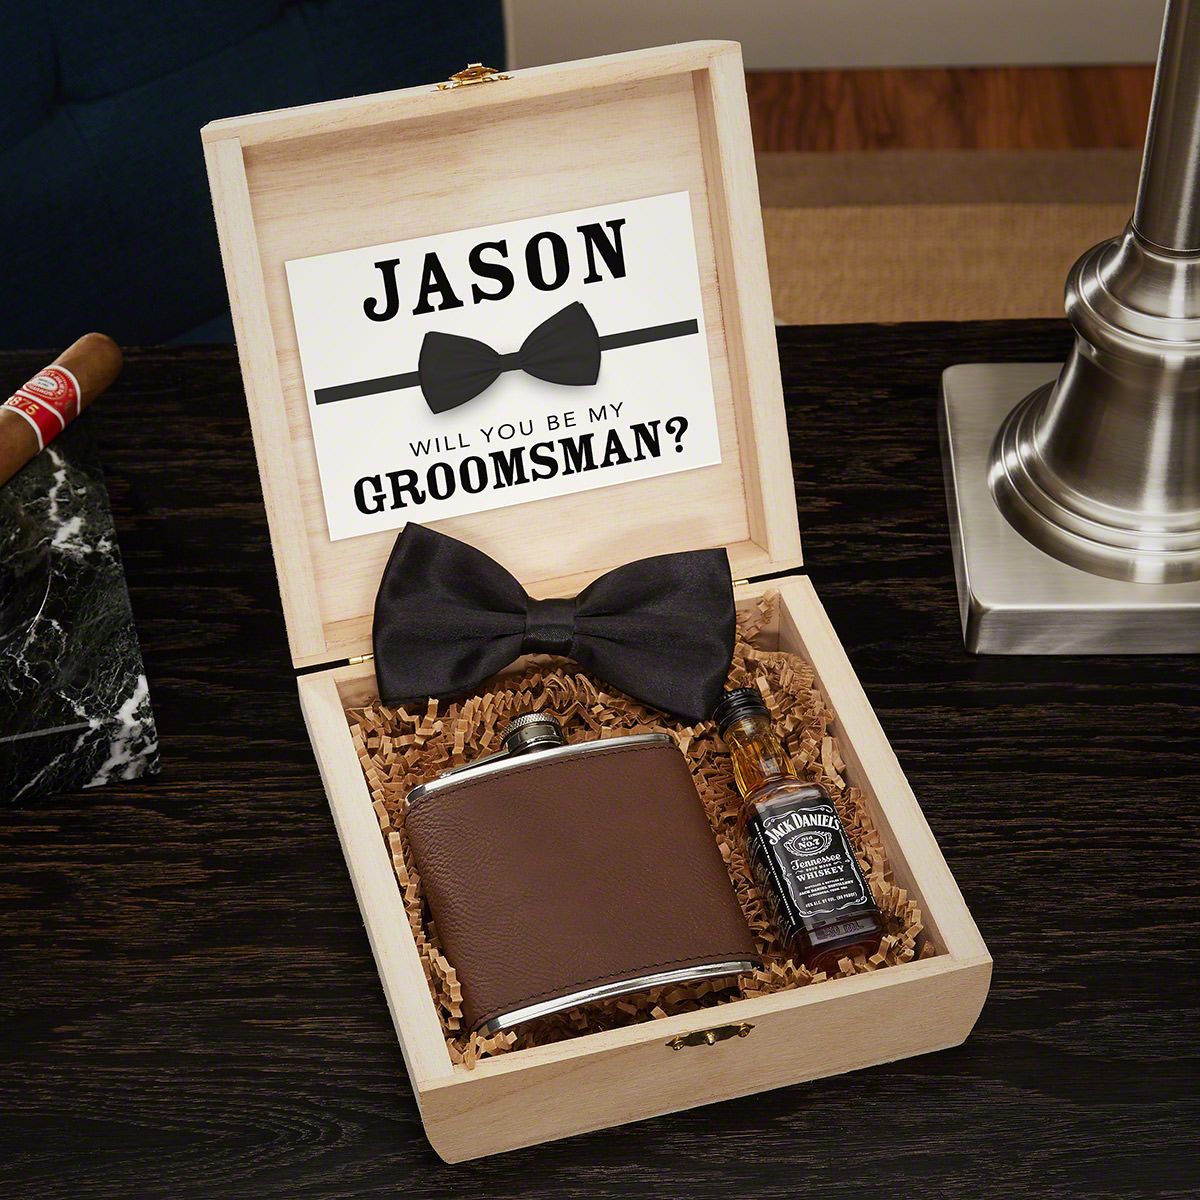 Groomsman Flask Engraved Flask Father of the Groom Gift Engraved Glass Flask Best Man Present Groomsmen Flasks Personalized Flask Set